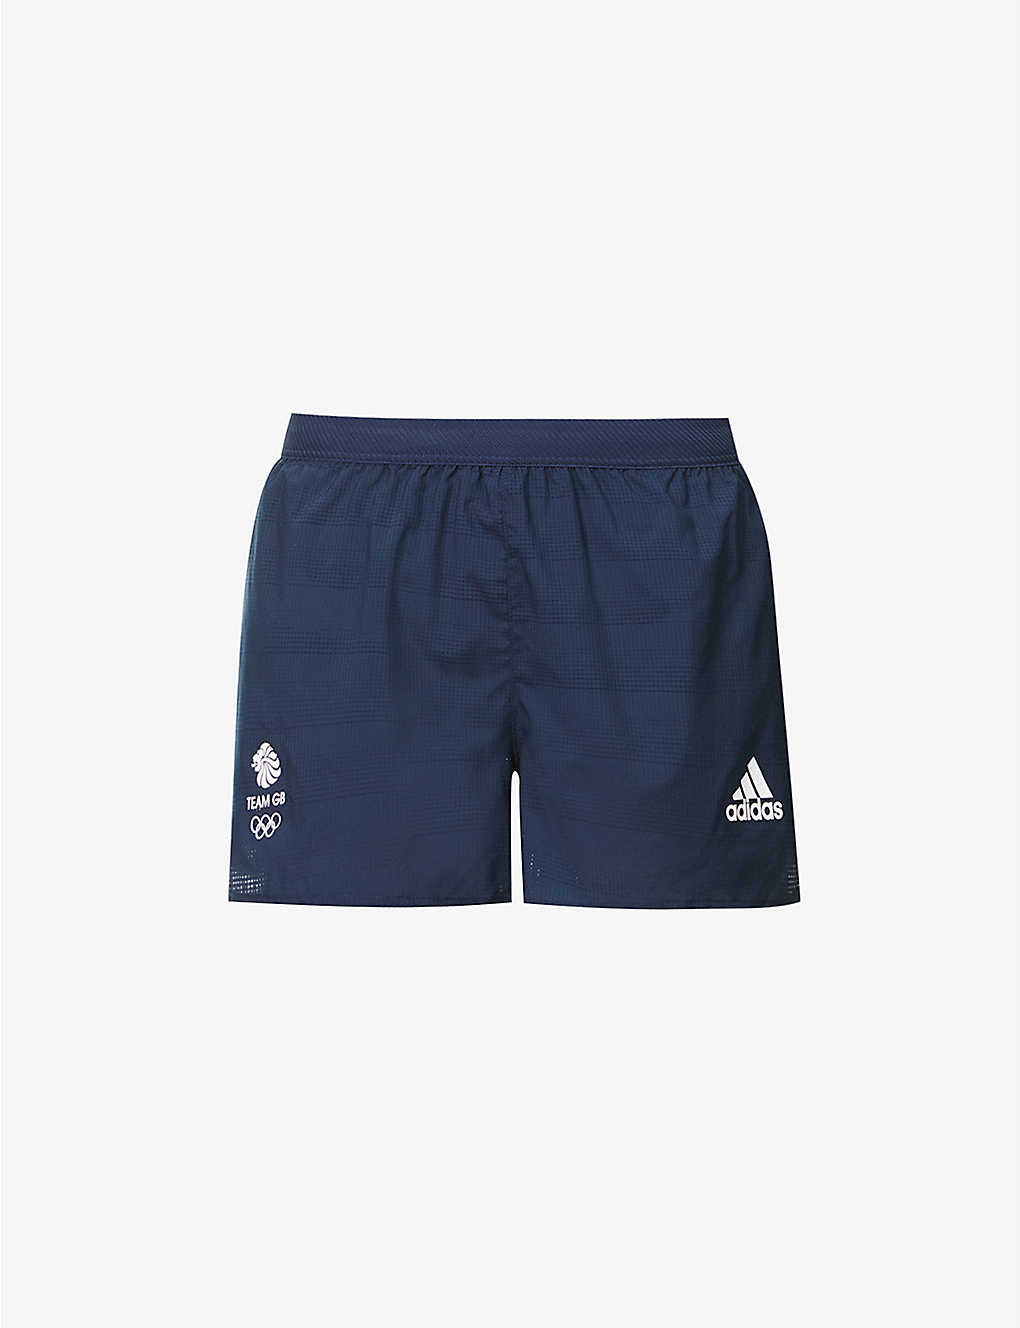 Team GB recycled-polyester running shorts(9424045)